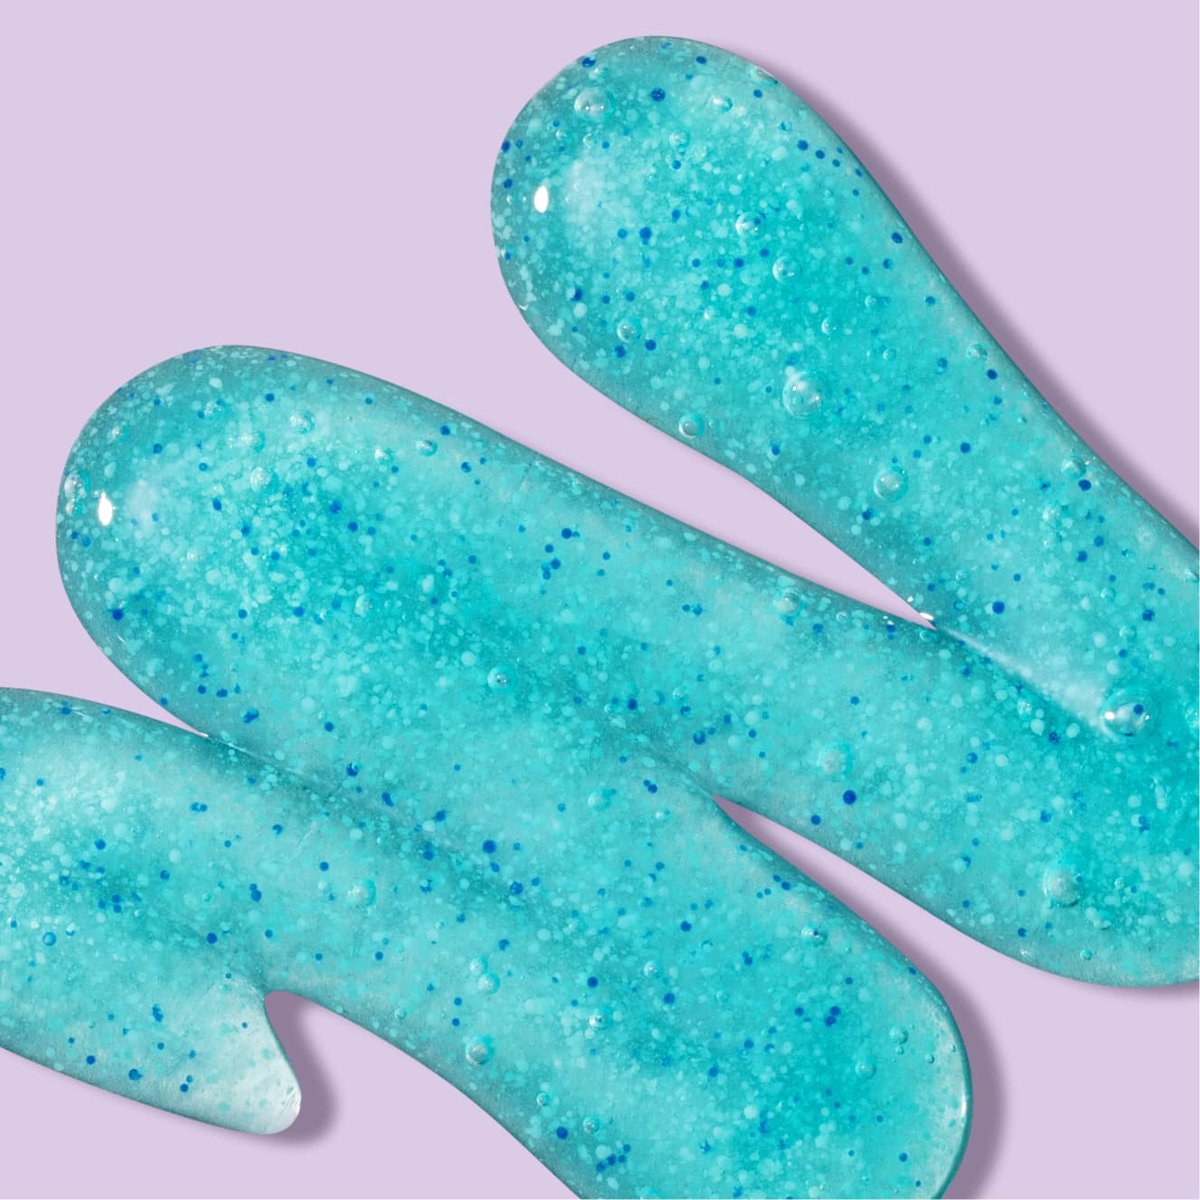 Turquoise deep action exfoliating scrub squiggle in front of light purple background